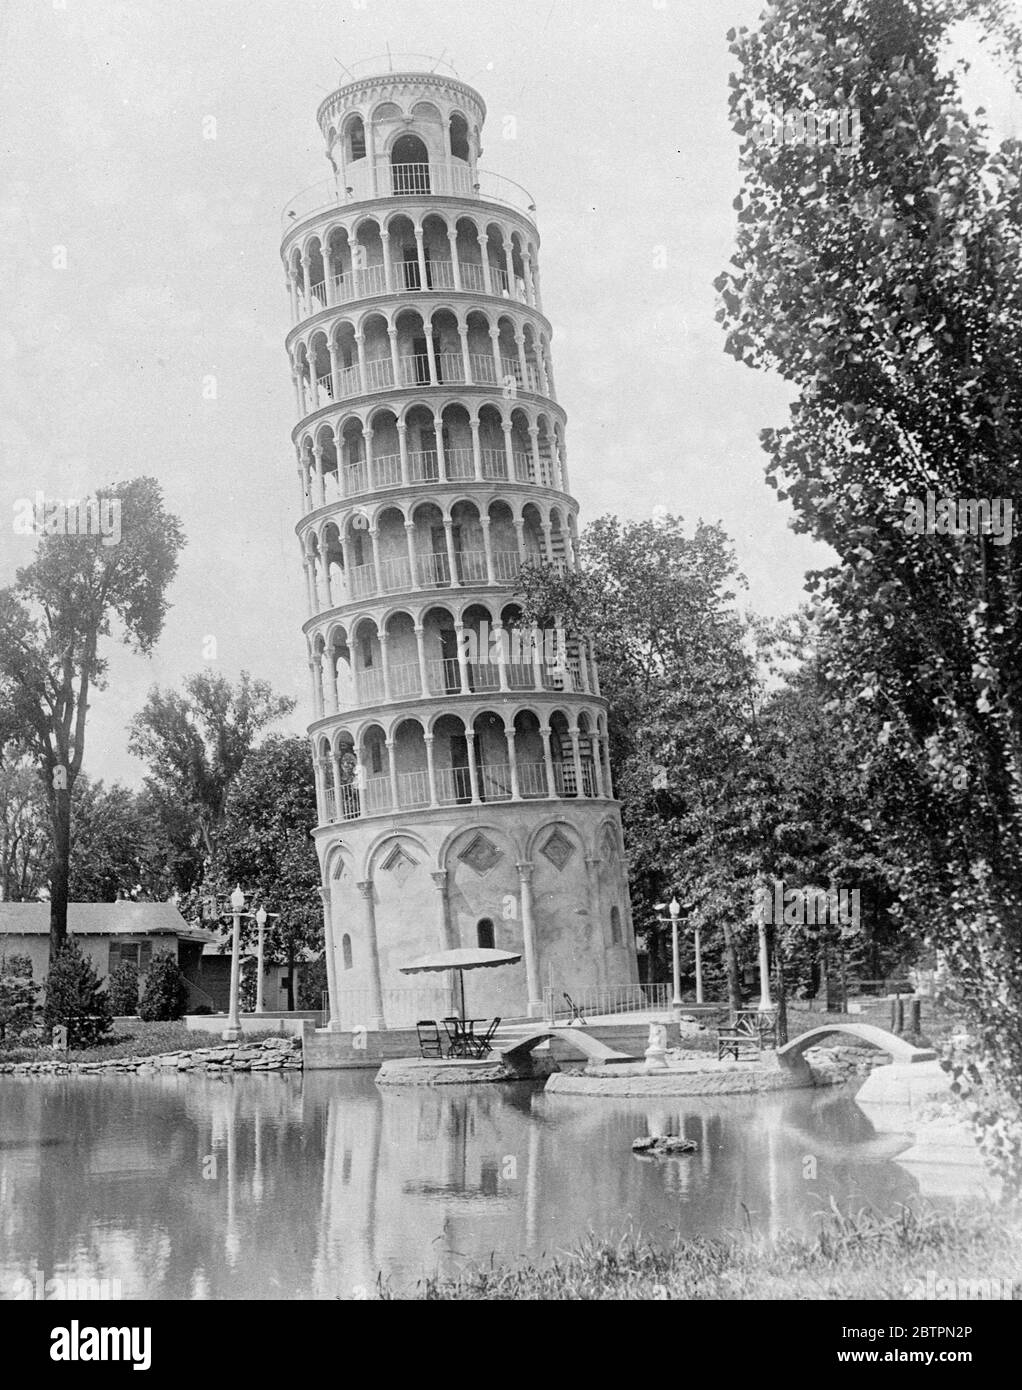 Chicago's 'leaning Tower'. A replica of the world famed leaning Tower of Pisa, which is being erected in a Chicago Park. It is 94 feet in height, 28 feet in diameter at the base and 26 feet at the top-exactly one half of the Italian original. The tower leans 7'4 out of a plumb . Stock Photo